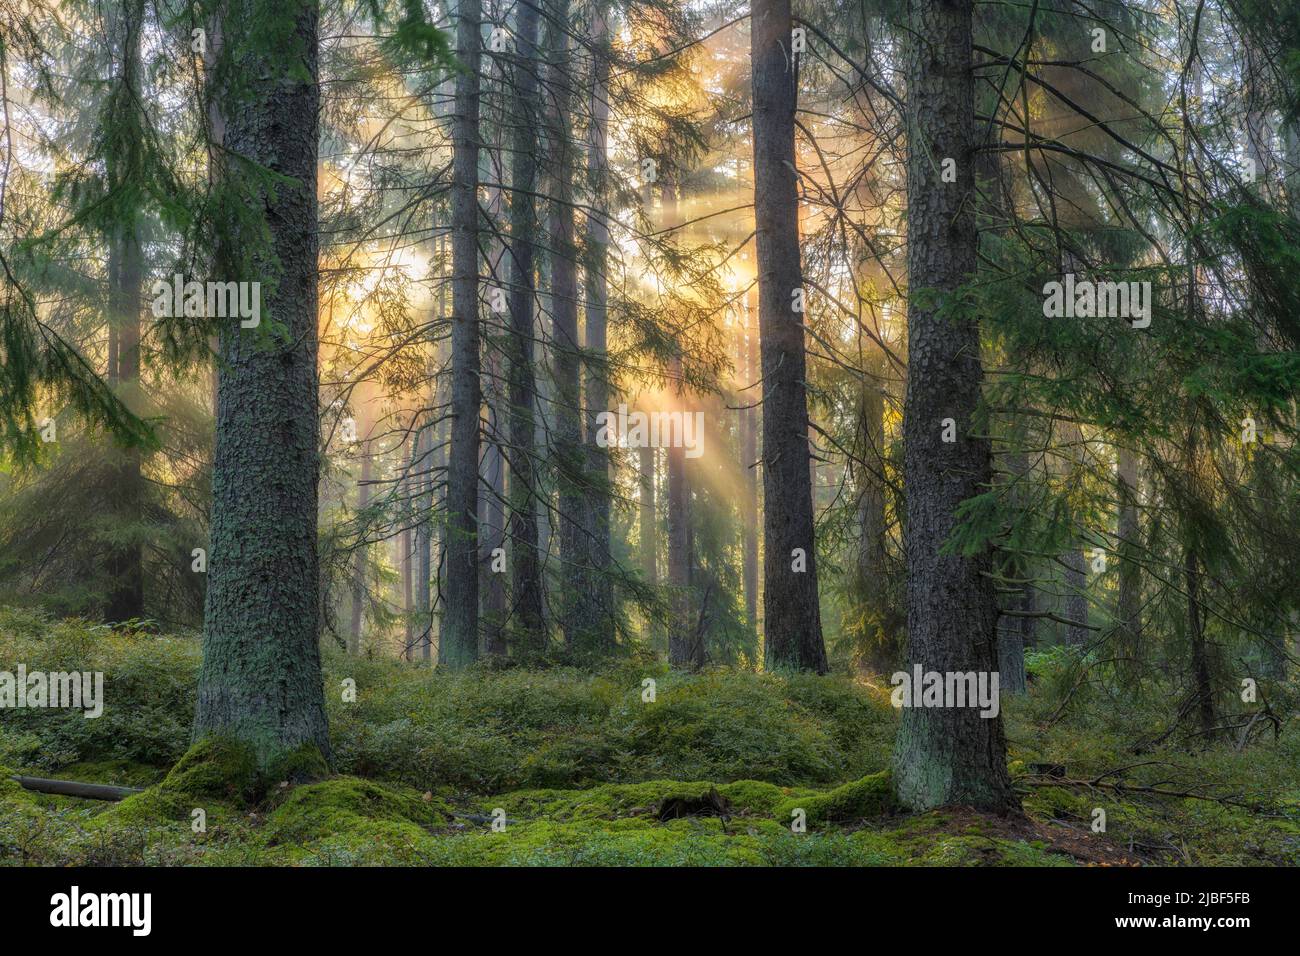 Sunset in pine forest in Lidingo, Sweden Stock Photo